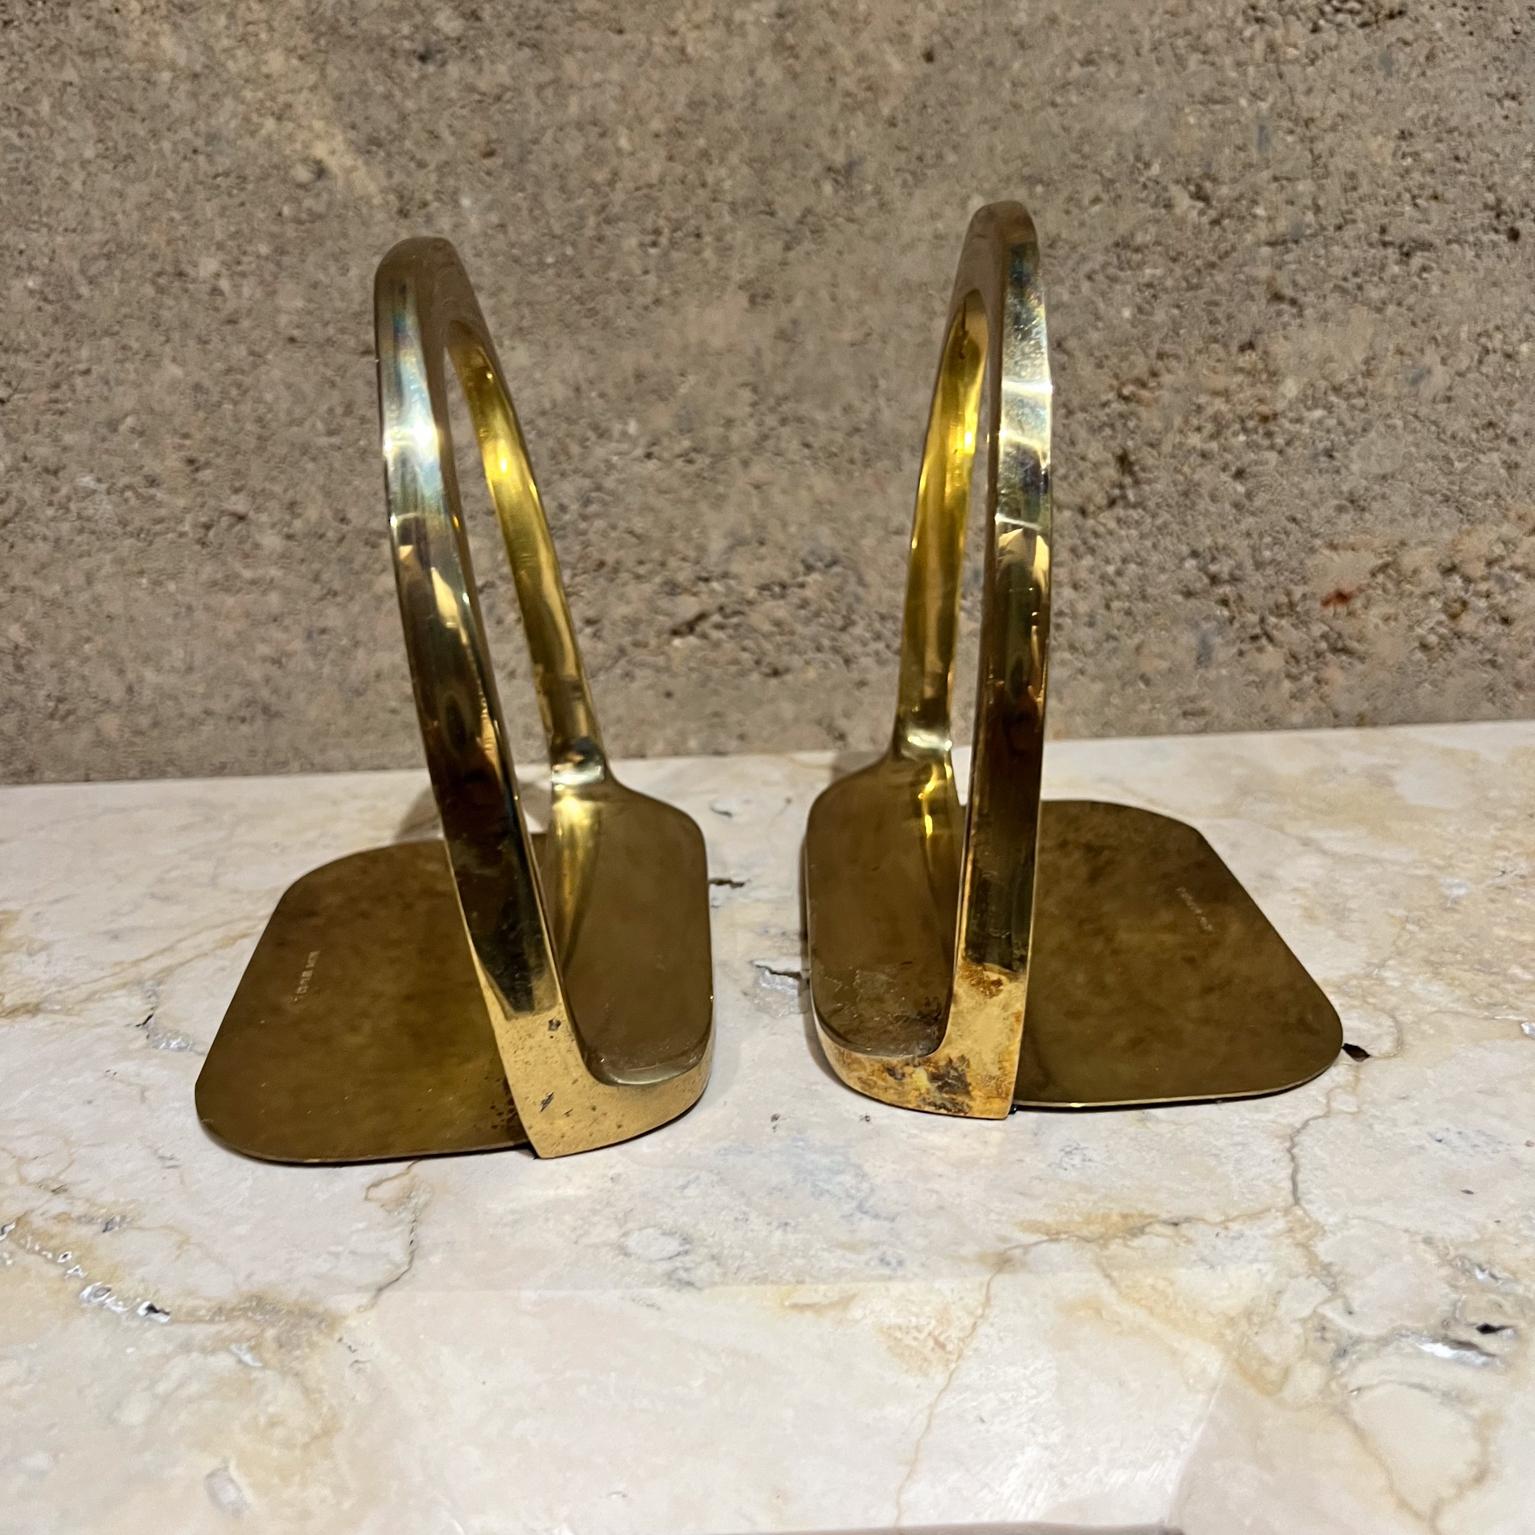 Brass Stirrup Bookends Vintage Equestrian
Stamped Korea
5.25 h x 4.75 w x 3 .38 d
Preowned unrestored vintage condition
See images shown.